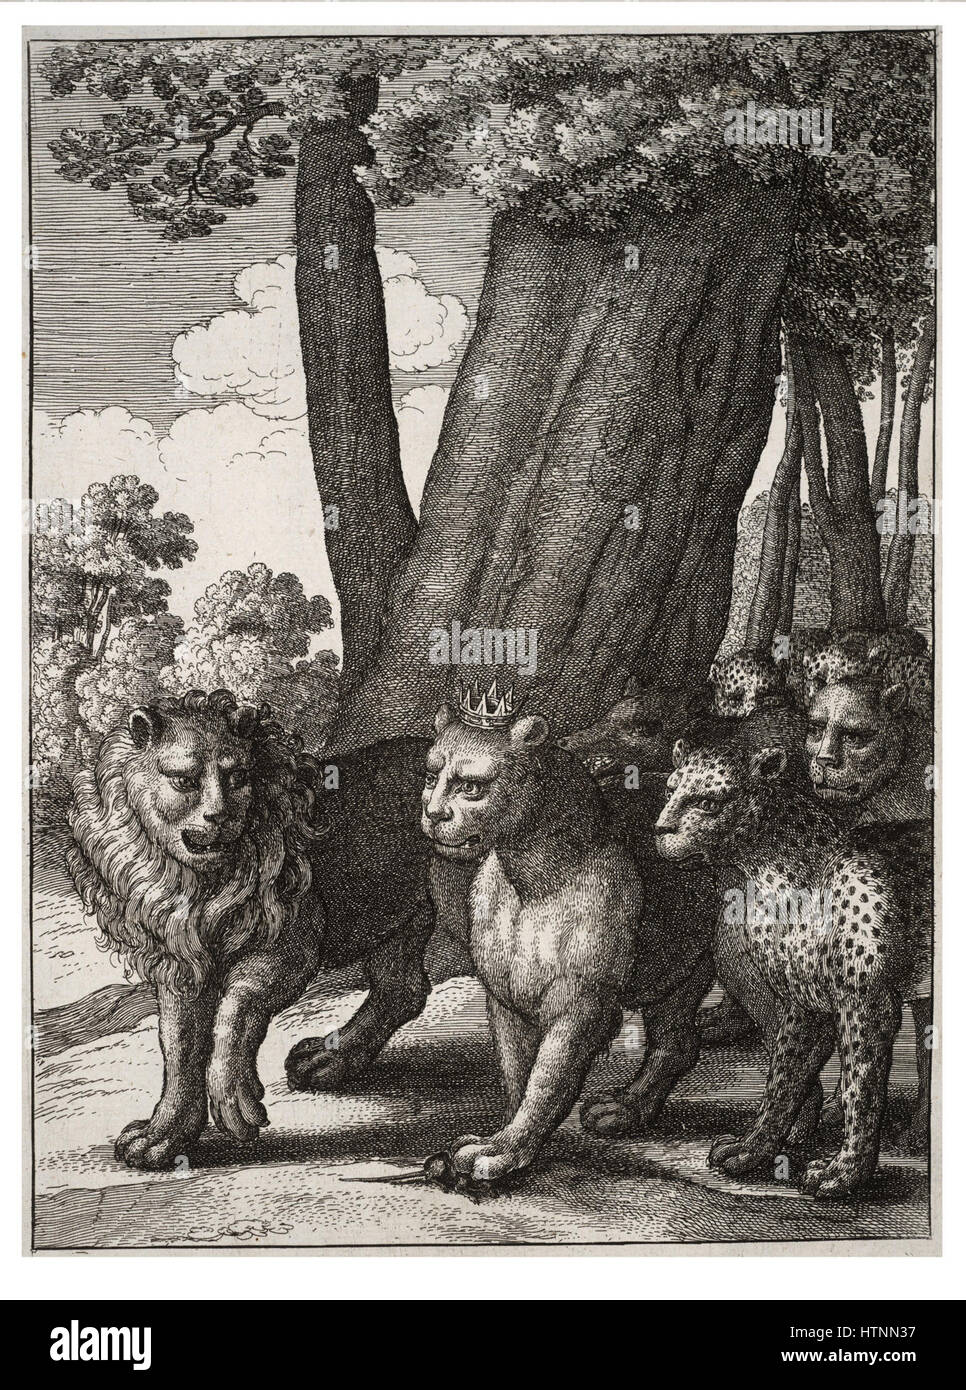 Wenceslas Hollar - The beasts of prey and the mouse Stock Photo